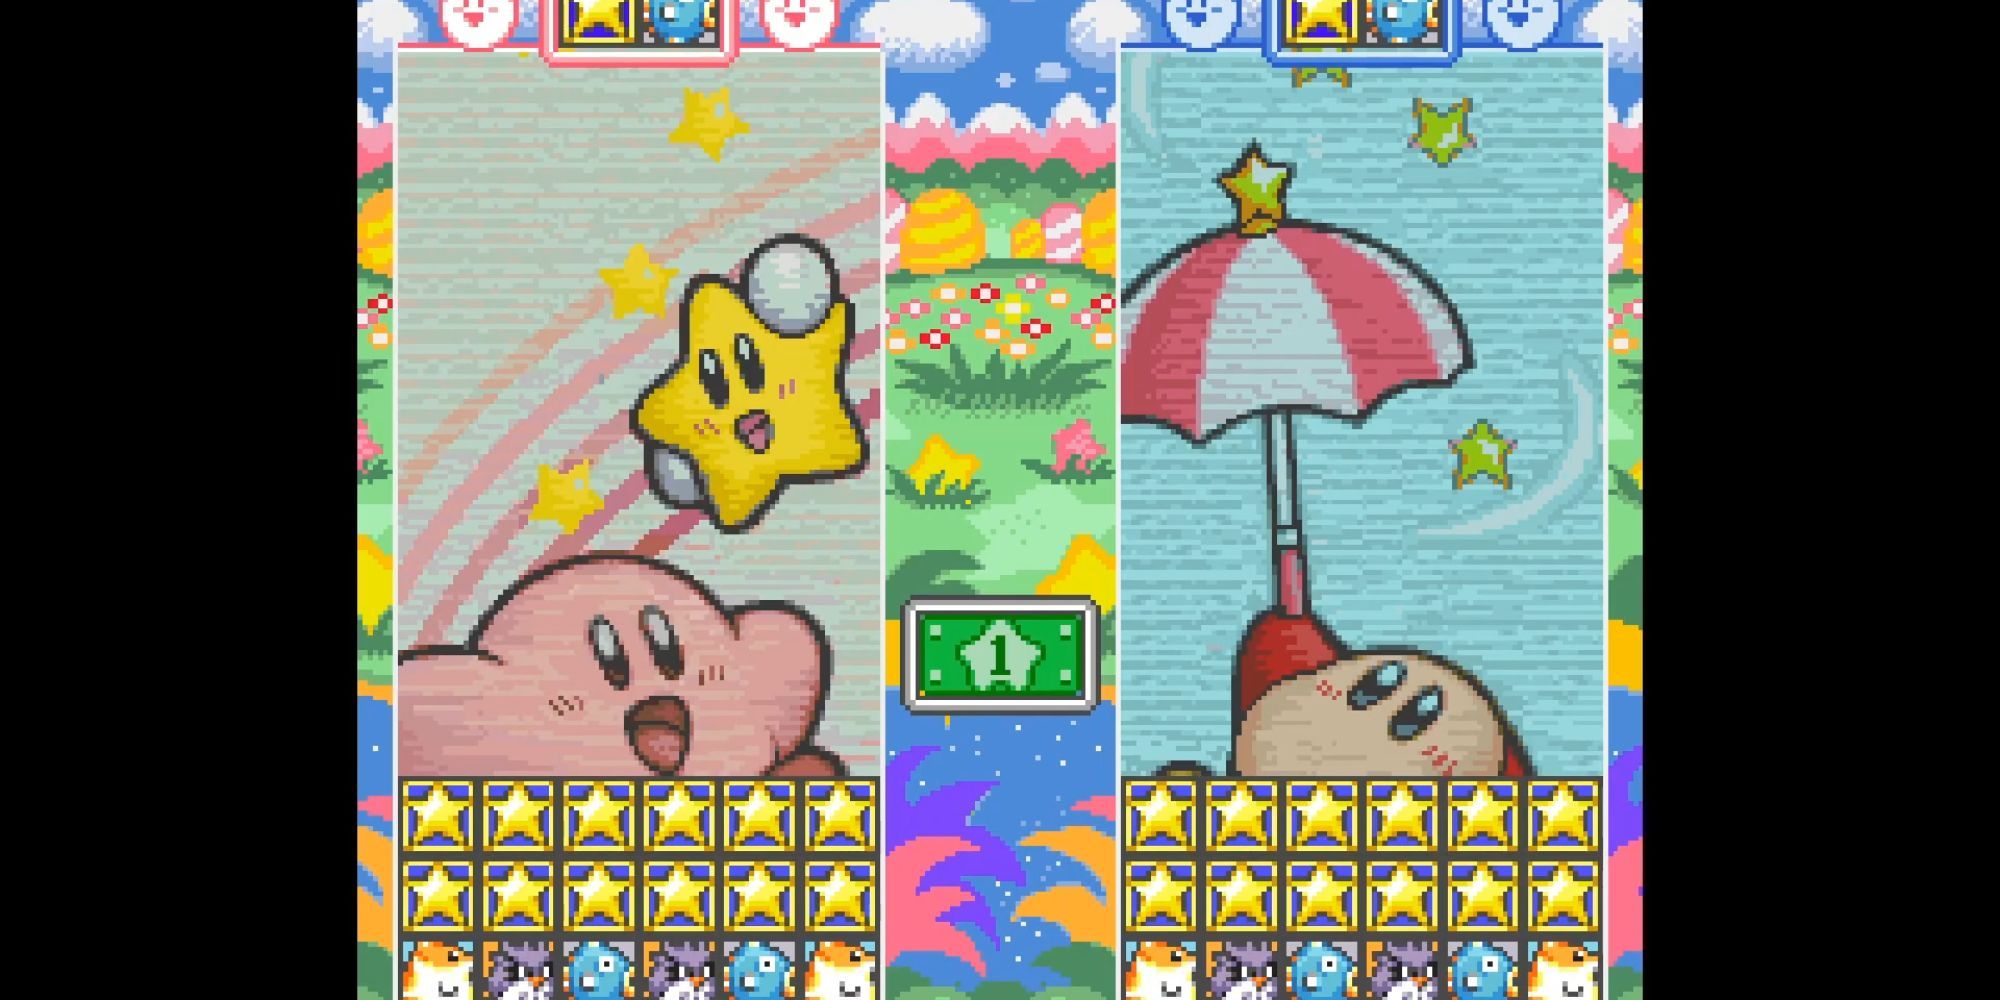 Kirby faces Waddle Dee in a Star Stacker match